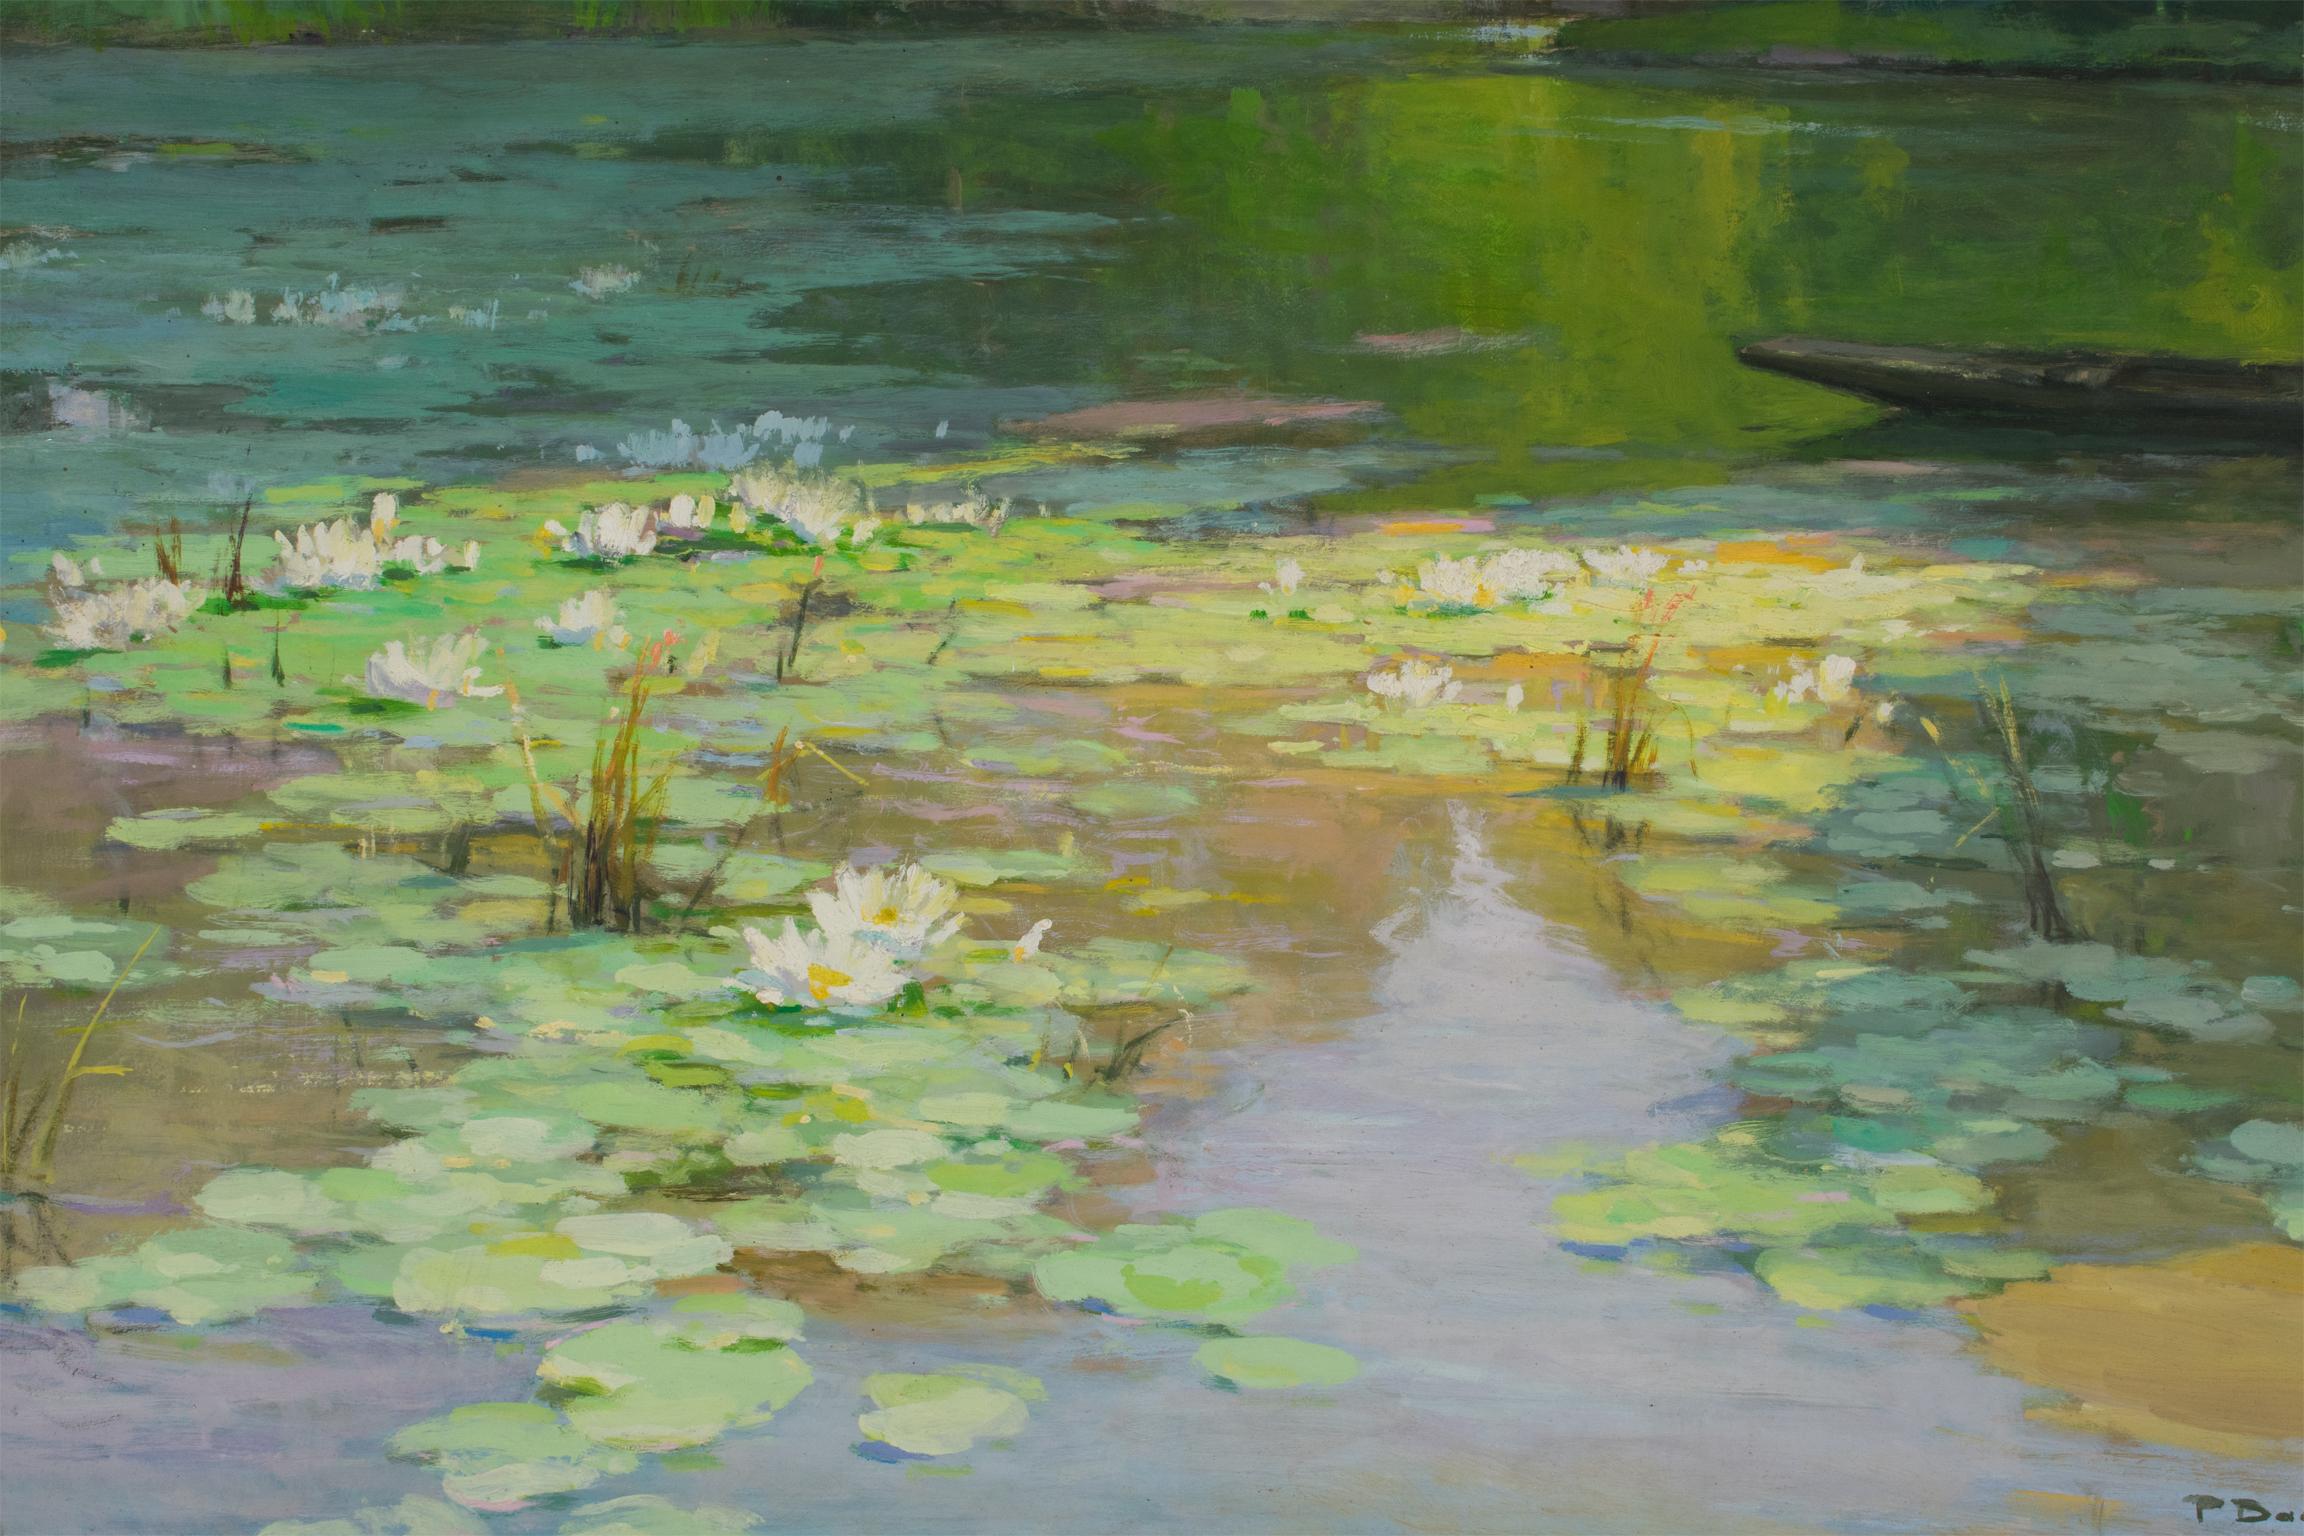 The Water Lilies, Oil on Masonite Board Painting by Pierre Laurent Baeschlin 9